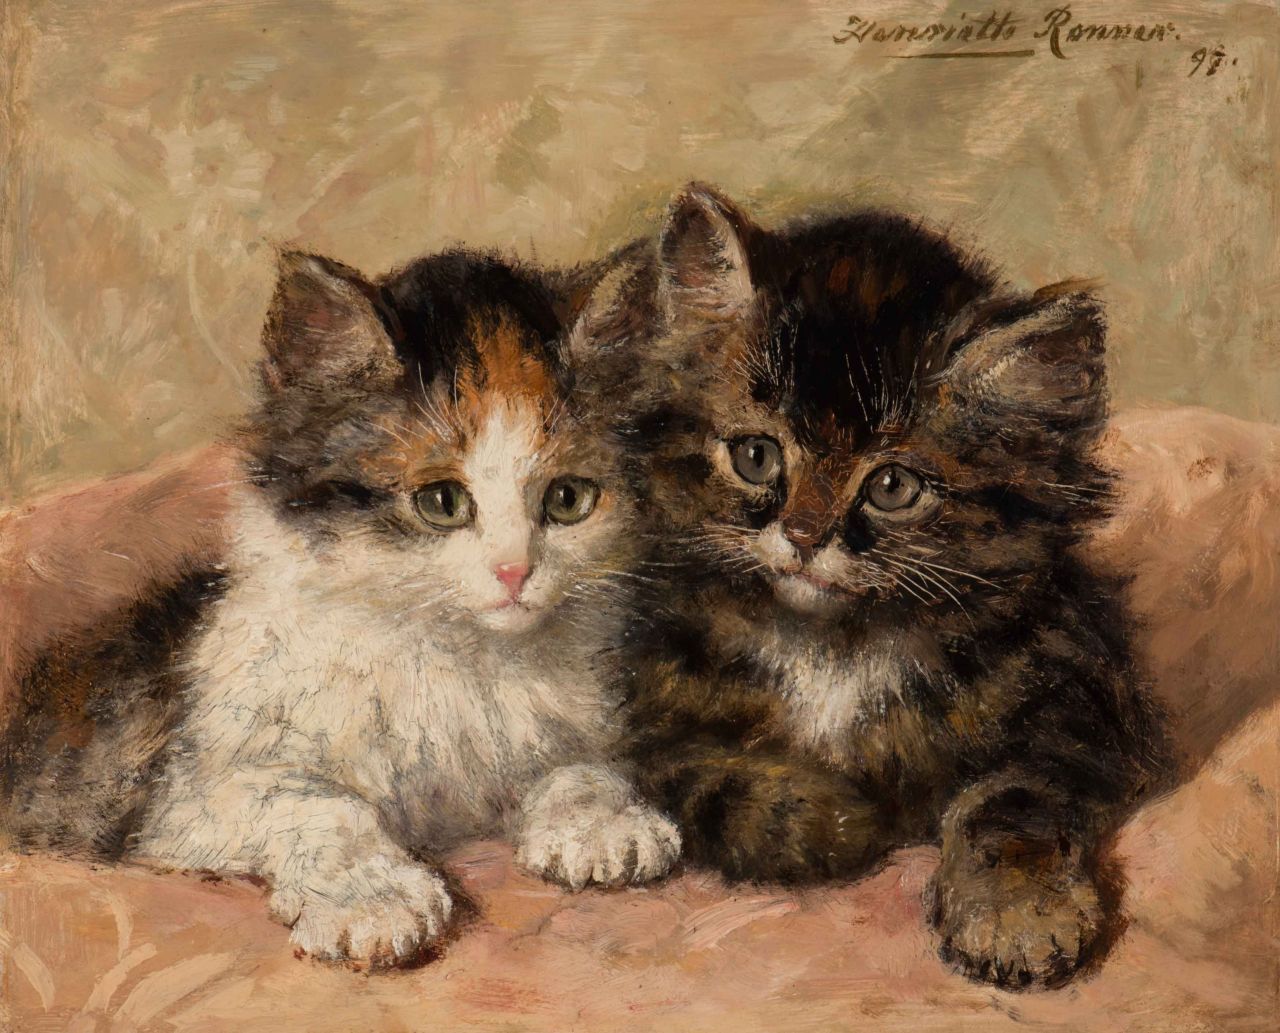 Ronner-Knip H.  | Henriette Ronner-Knip, Two kittens, oil on panel 19.5 x 23.6 cm, signed u.r. and dated '97